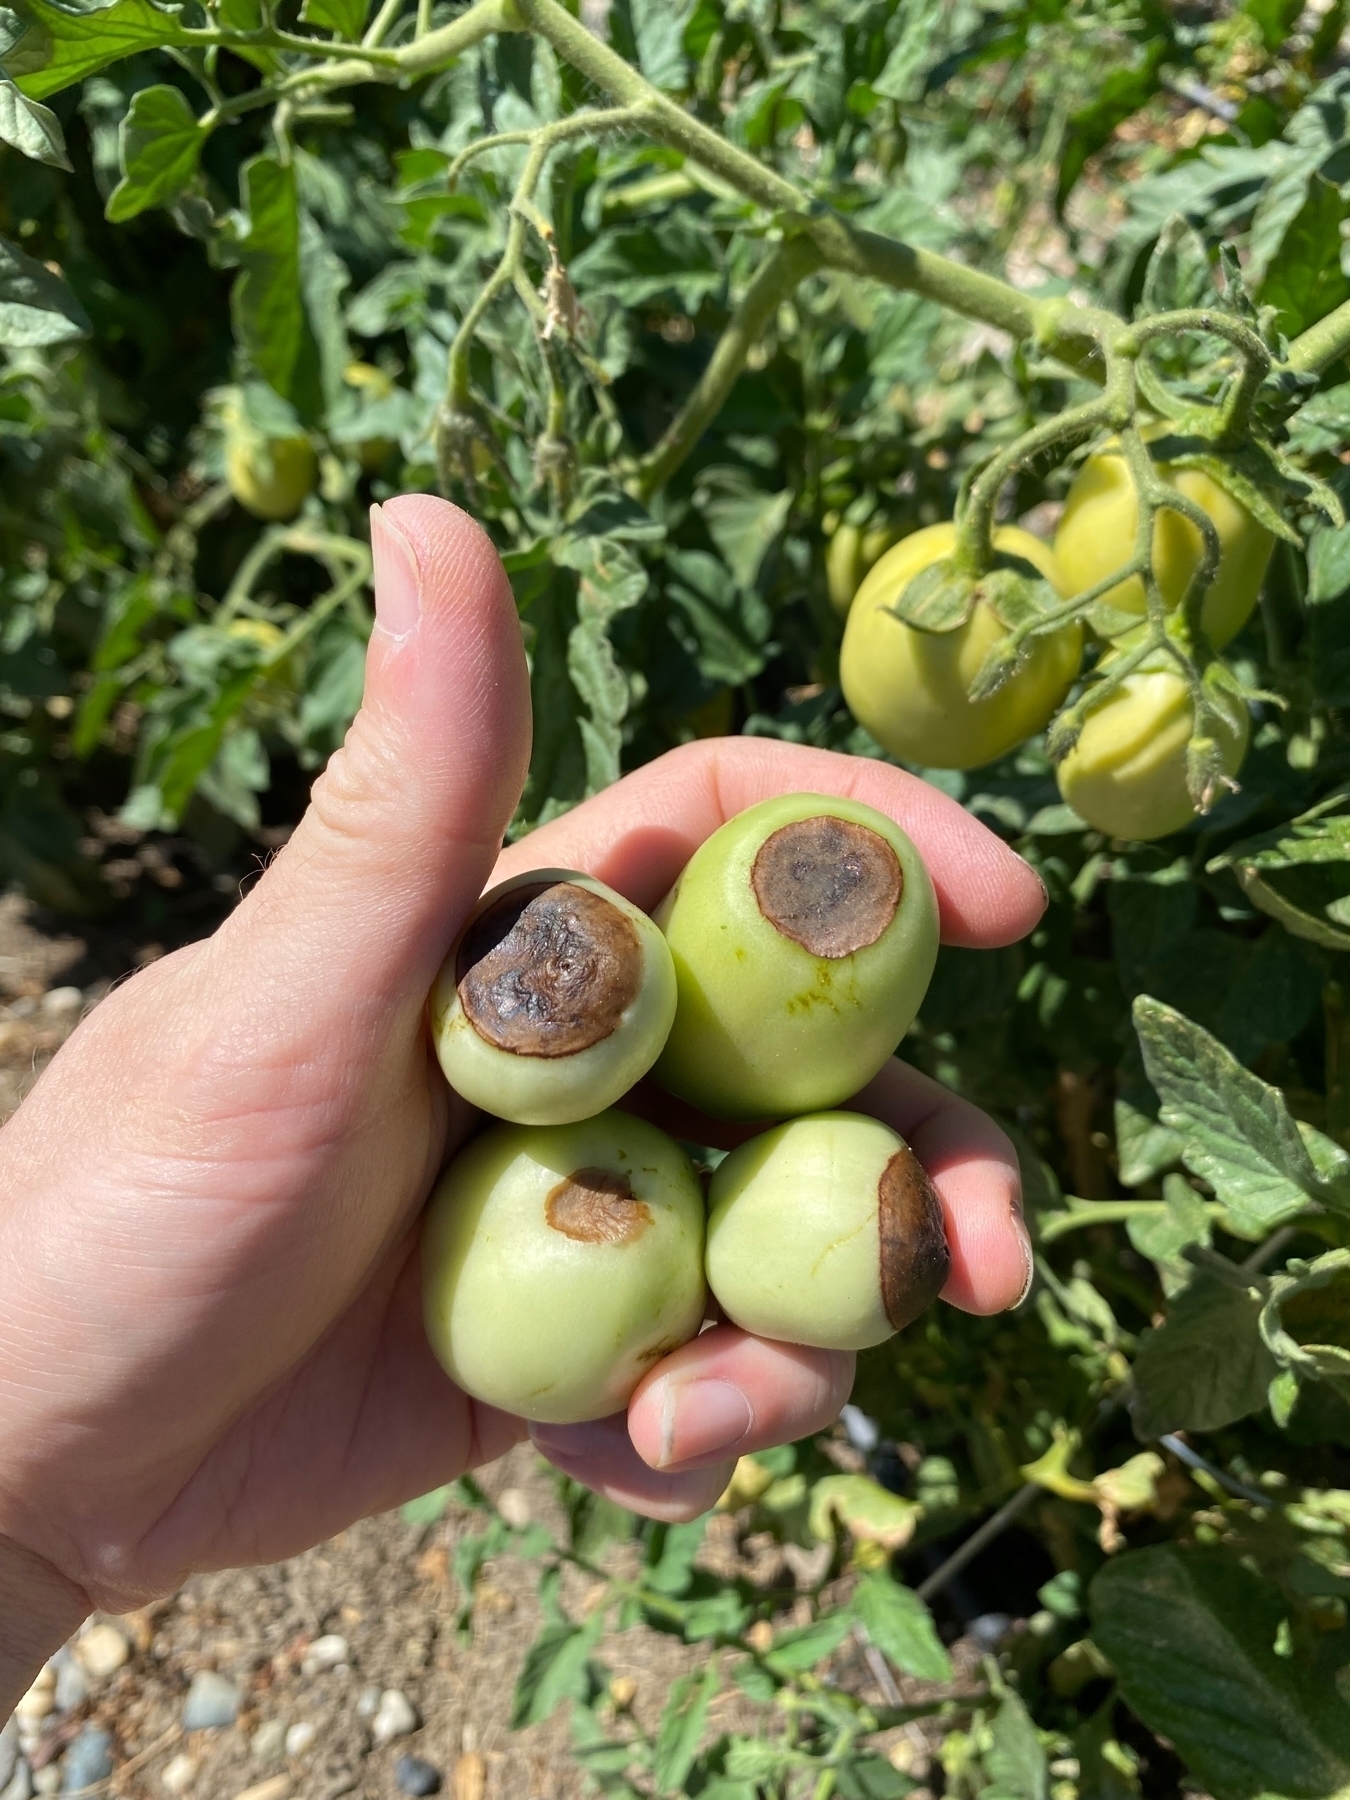 tomato end rot presenting with brown soft circles on the bottom